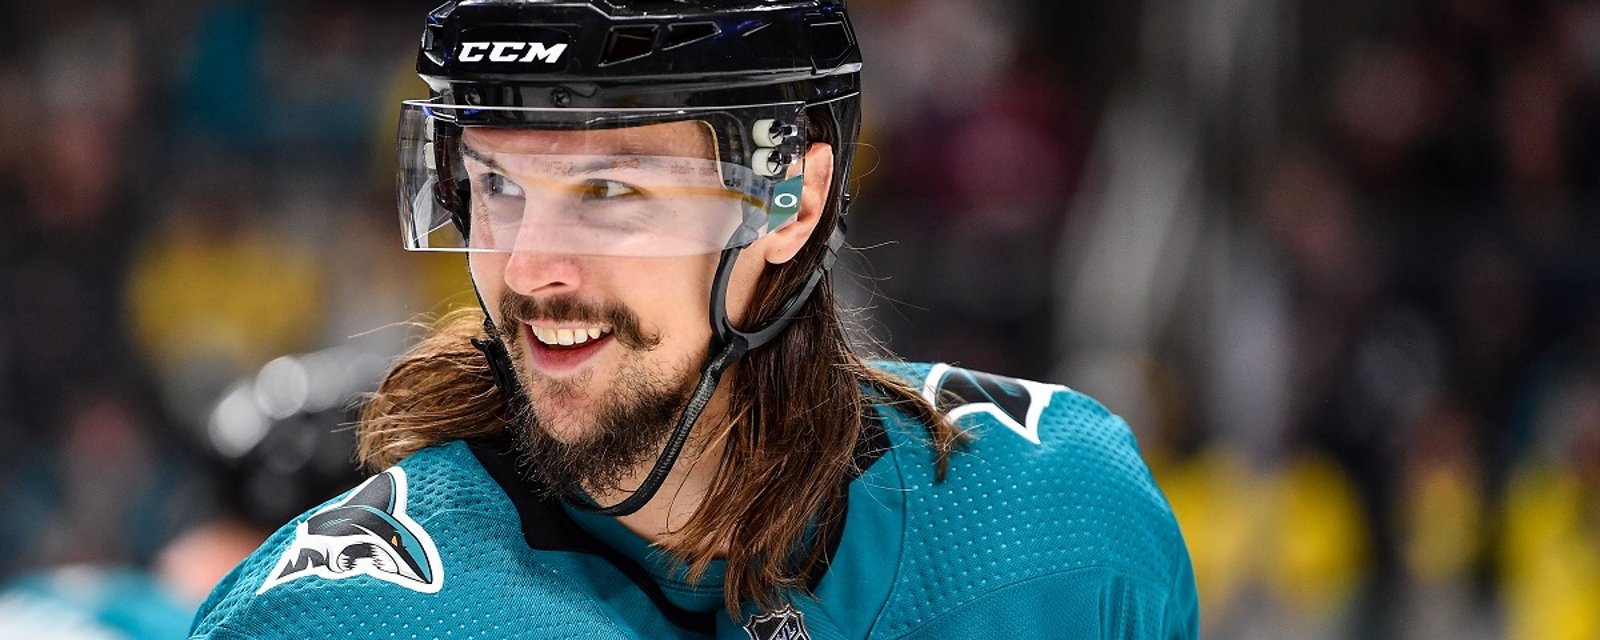 Major update on Erik Karlsson just in time for the final game of the season.